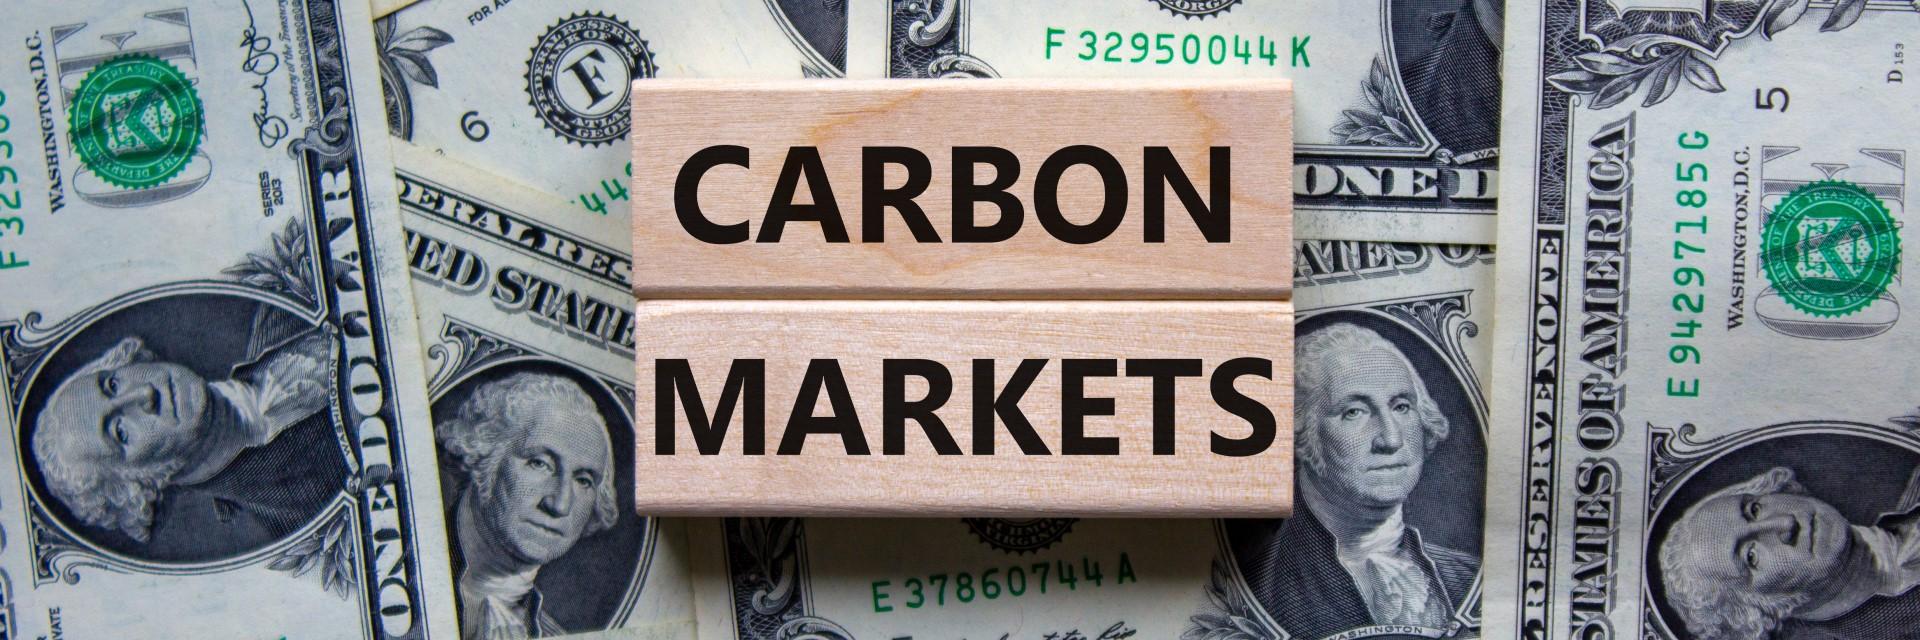 African countries could leverage their vast renewable energy and natural resources to export premium carbon credits for new revenue streams